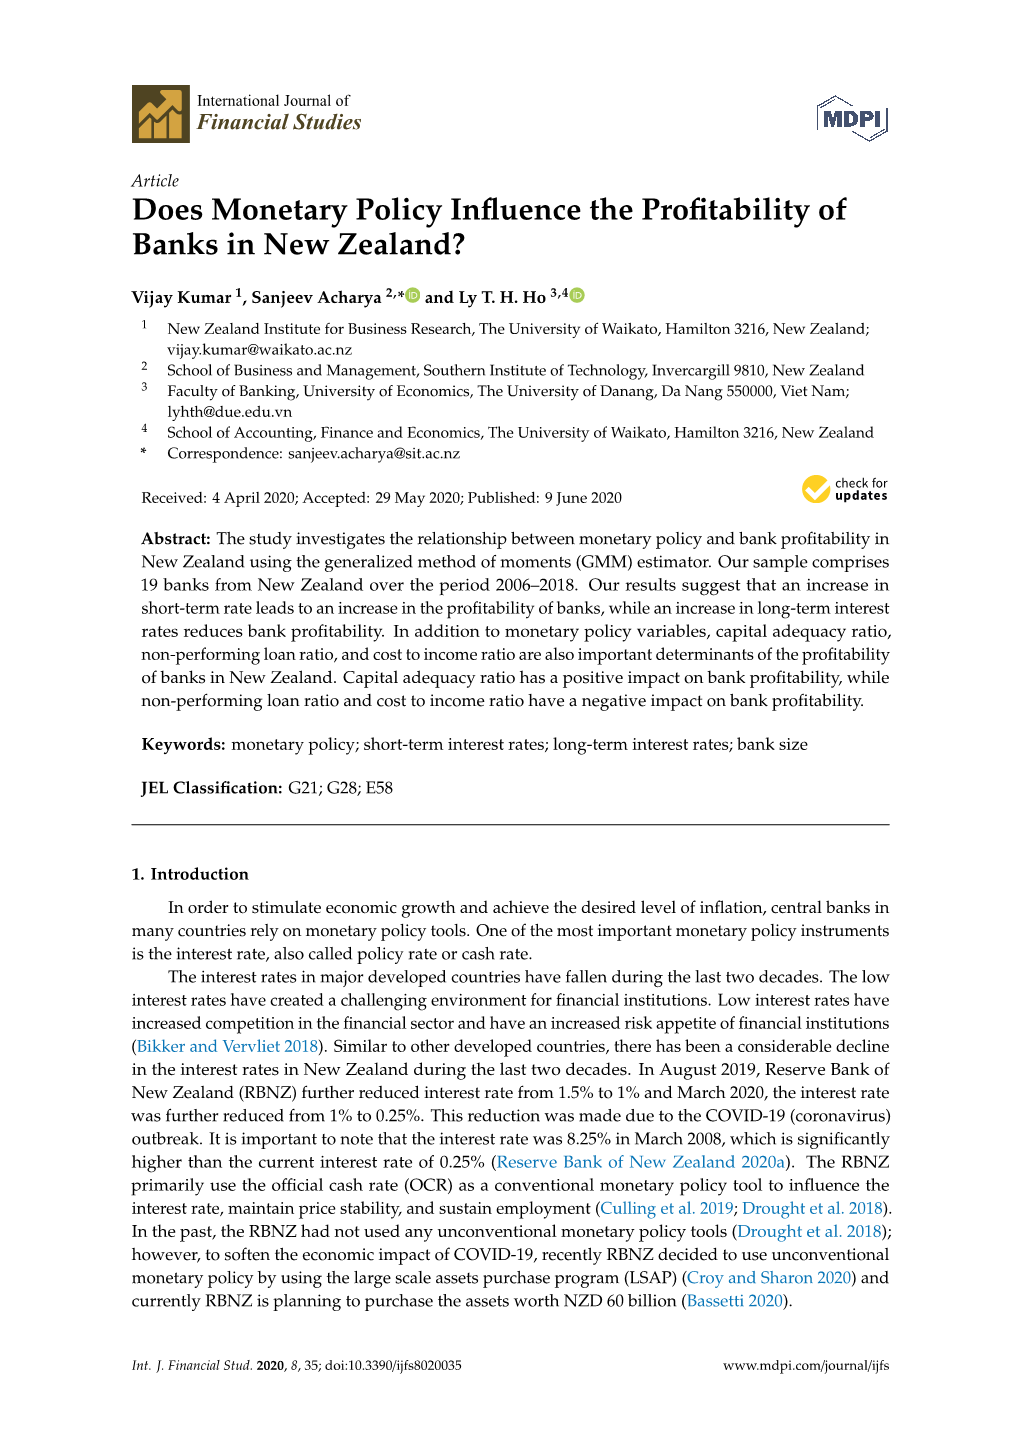 Does Monetary Policy Influence the Profitability of Banks in New Zealand?